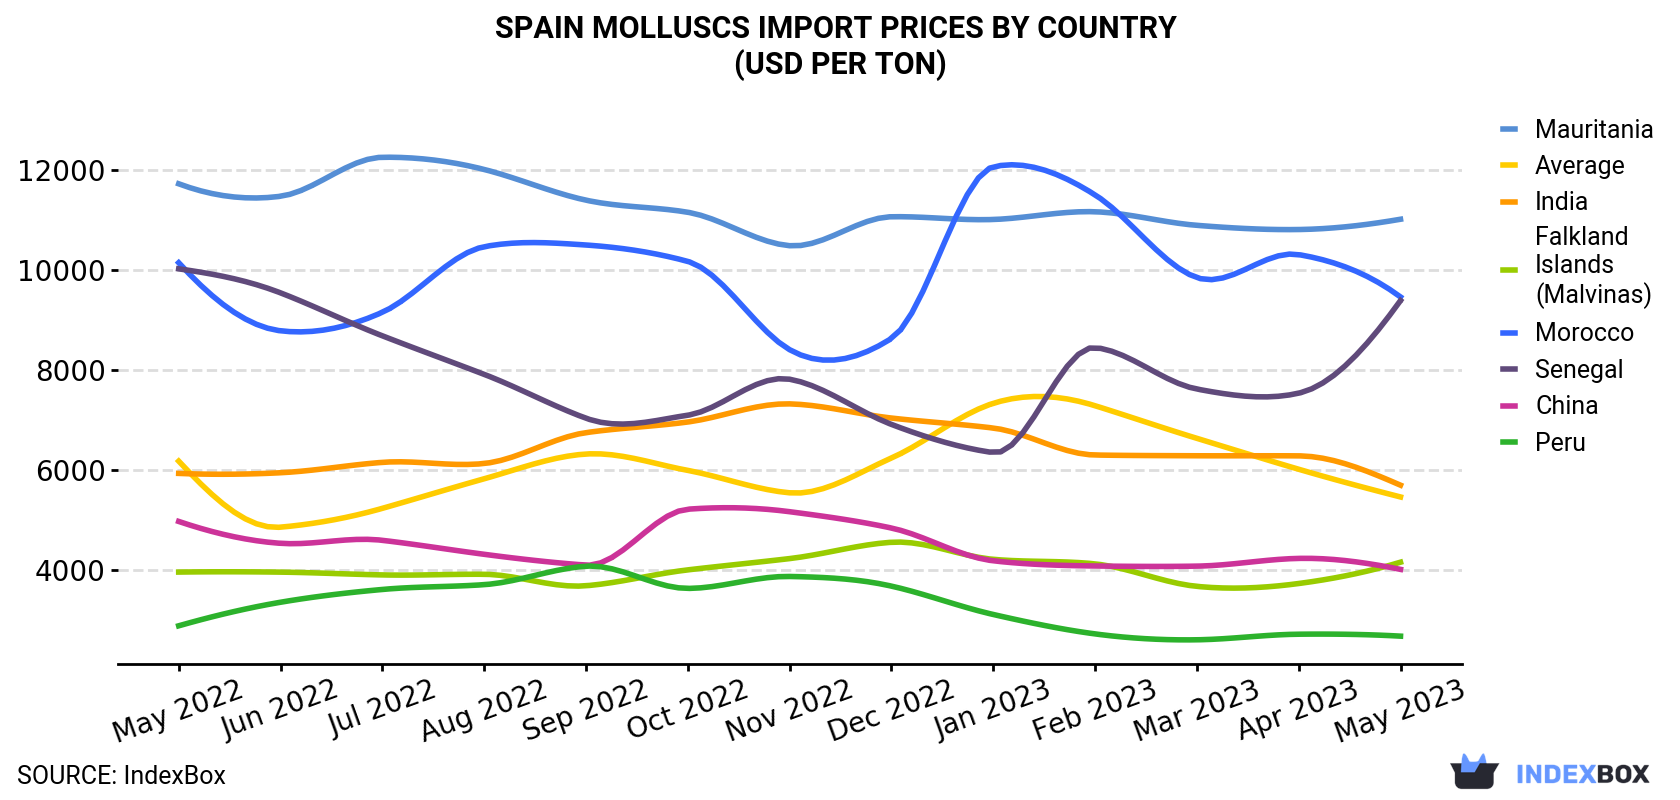 Spain Molluscs Import Prices By Country (USD Per Ton)